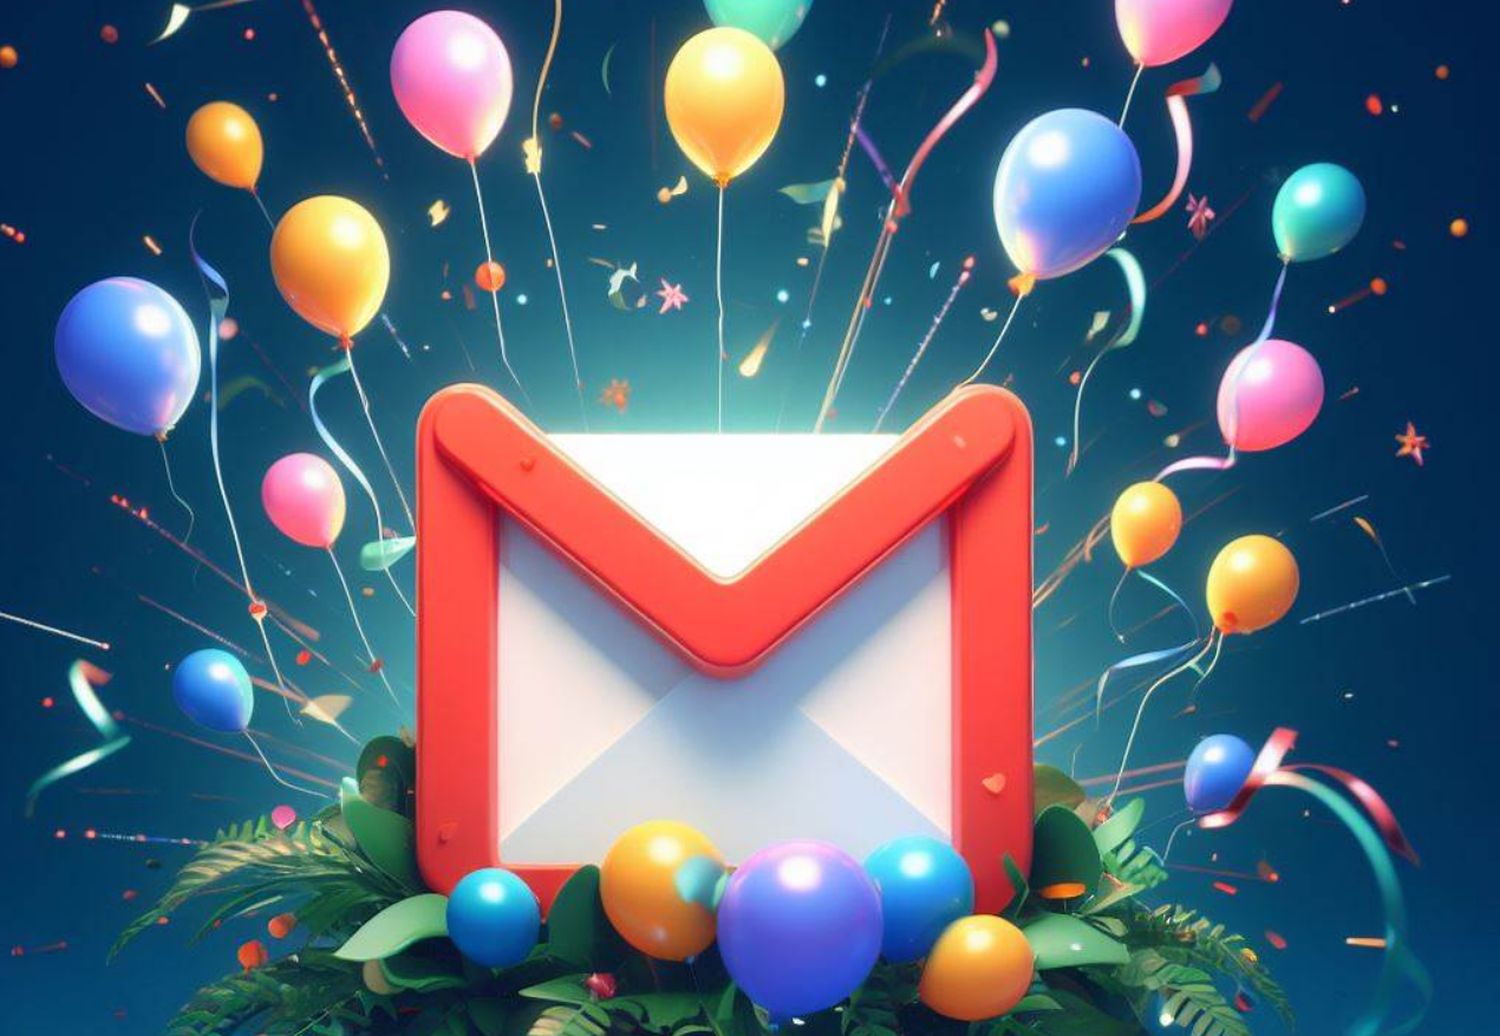 Gmail goes Messenger